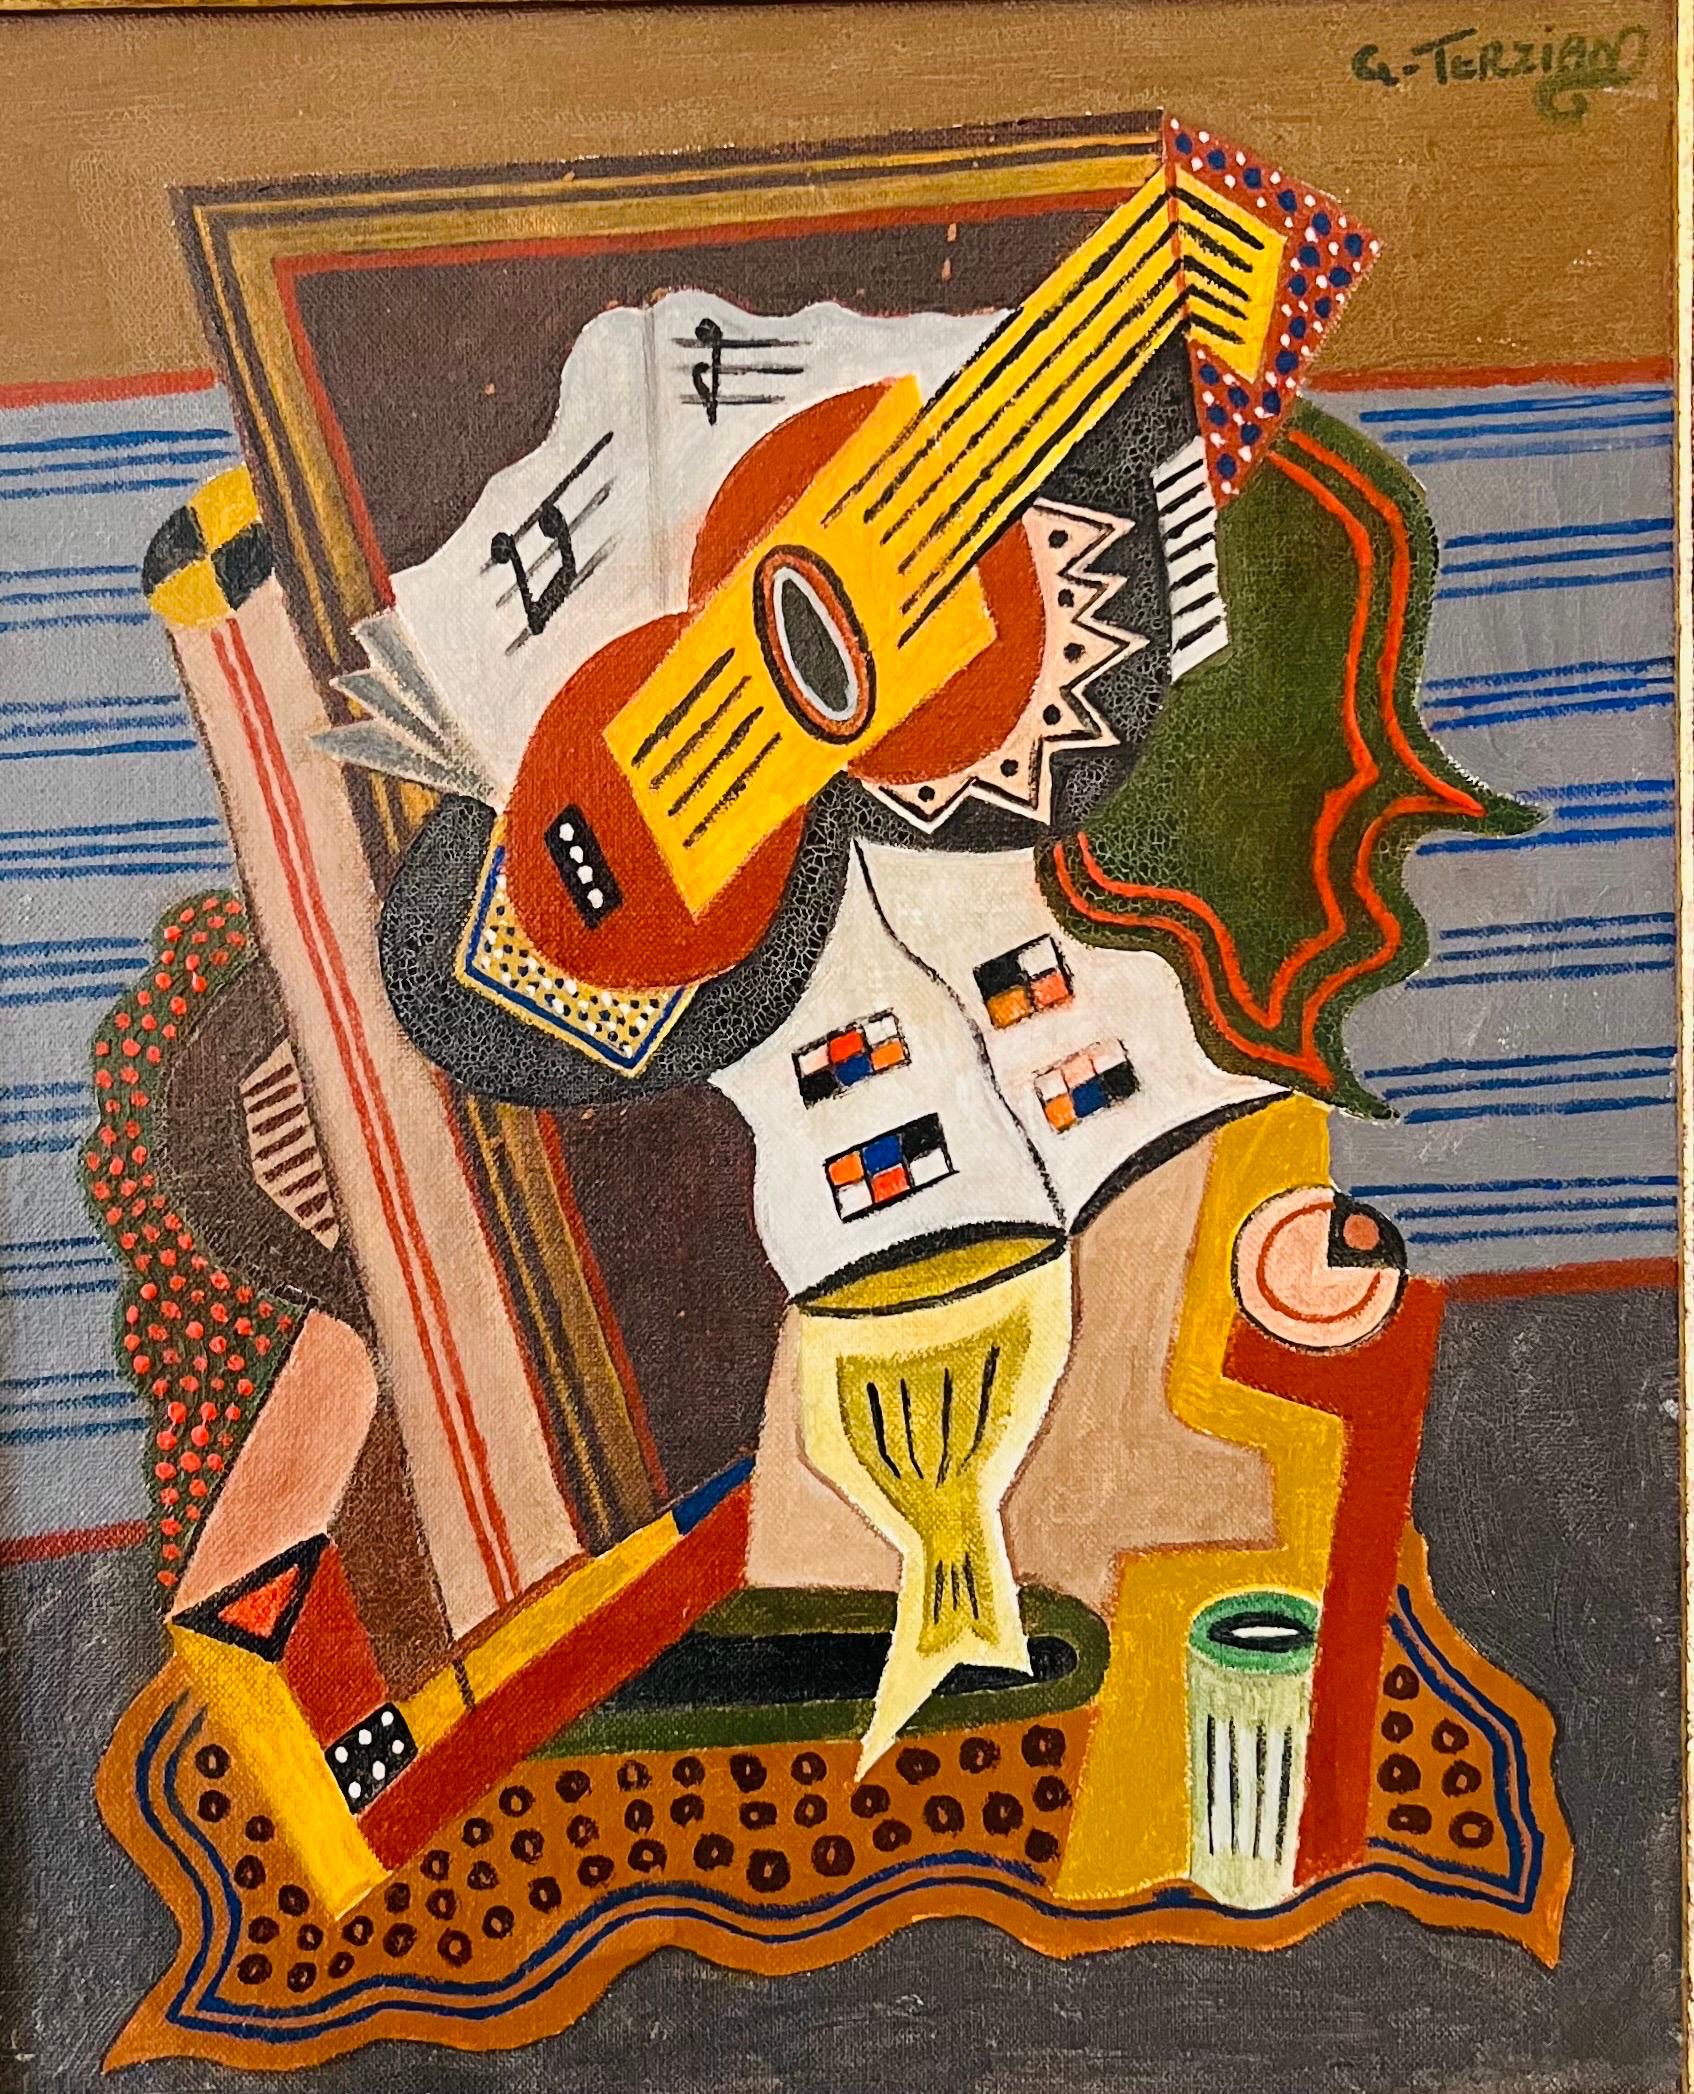 Composition with guitar - Art by Georges Terzian